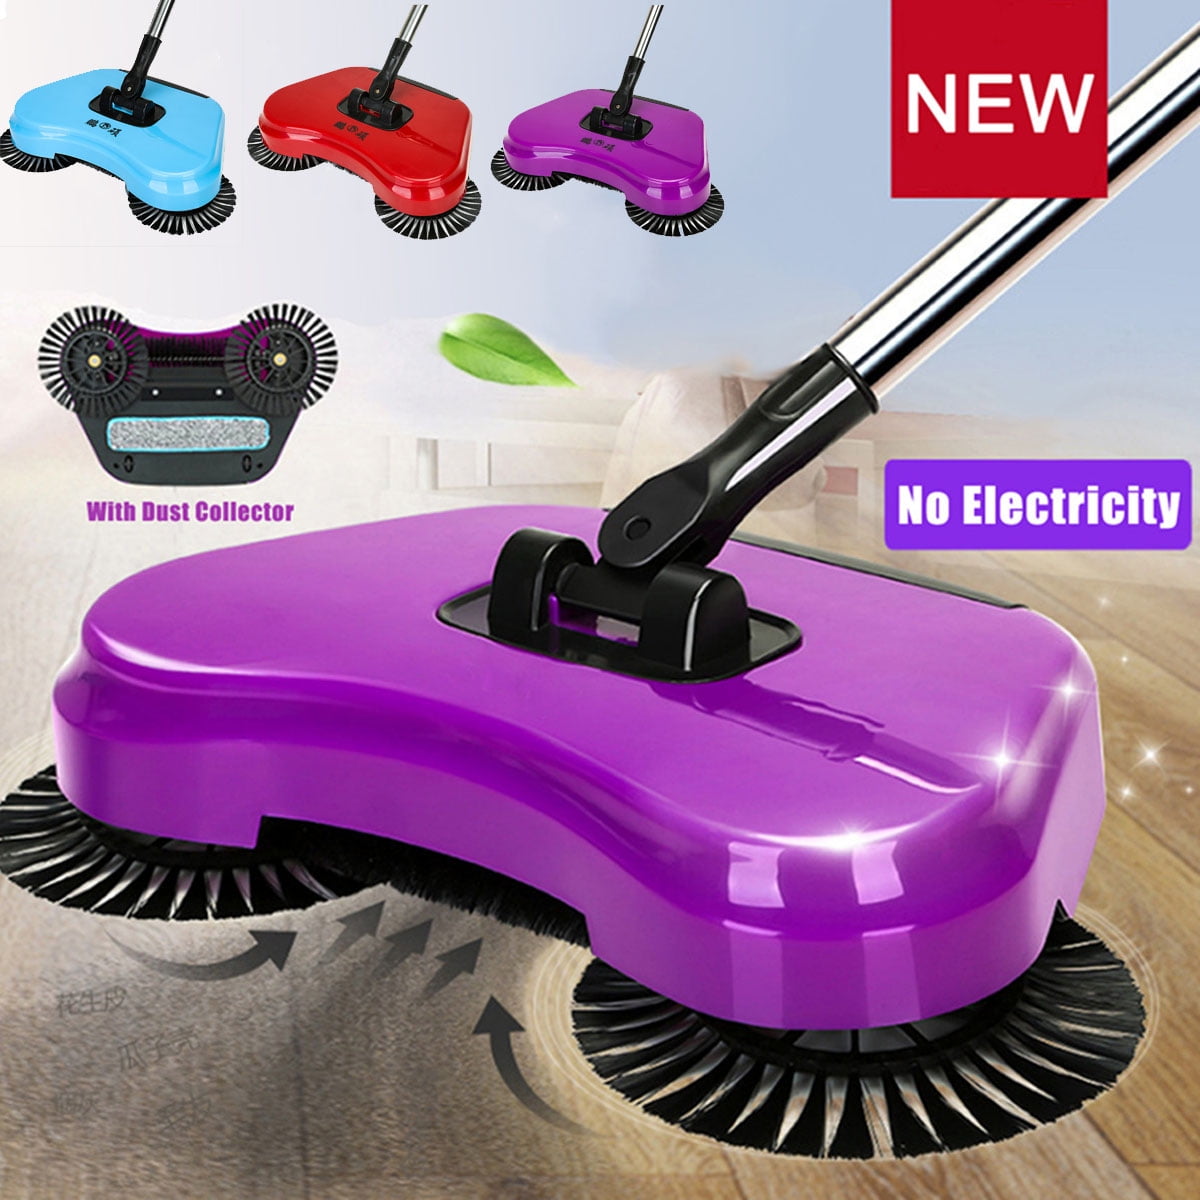 Household Spin Hand Push Sweeper Broom Floor Cleaning Mop No Electricity Office